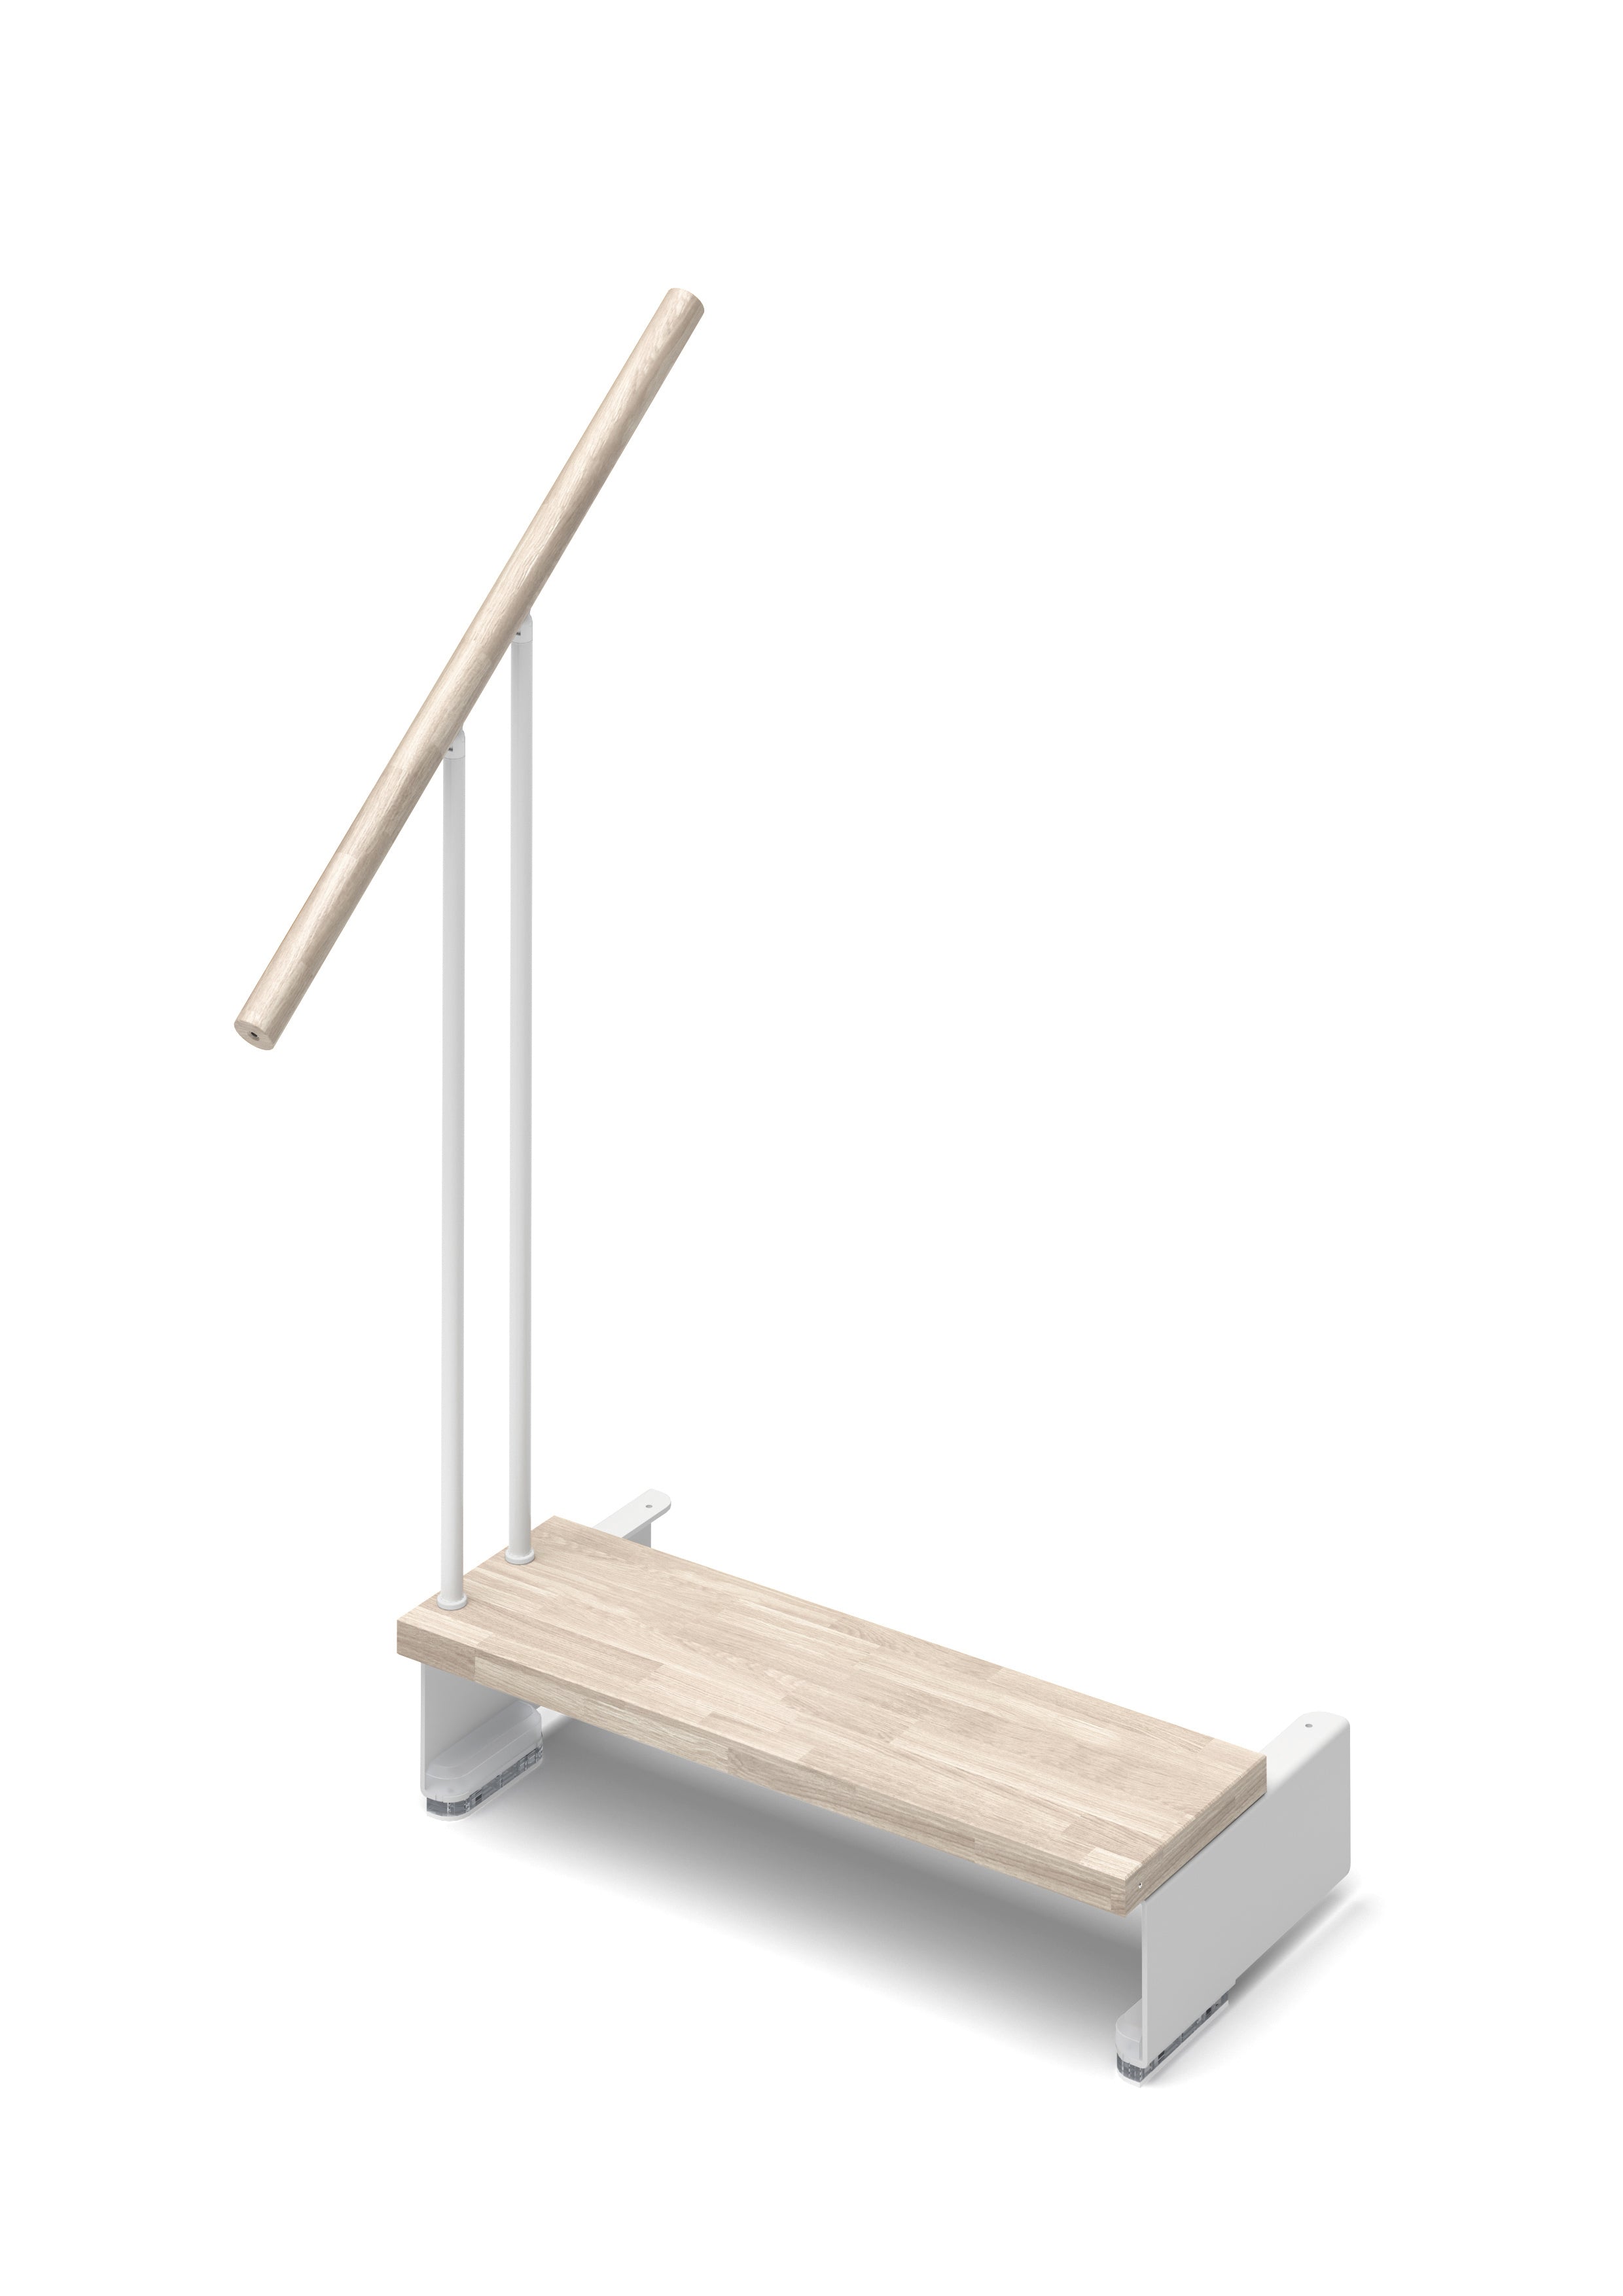 Additional step Adapta 74cm (with structure and railing) - Whitened 84